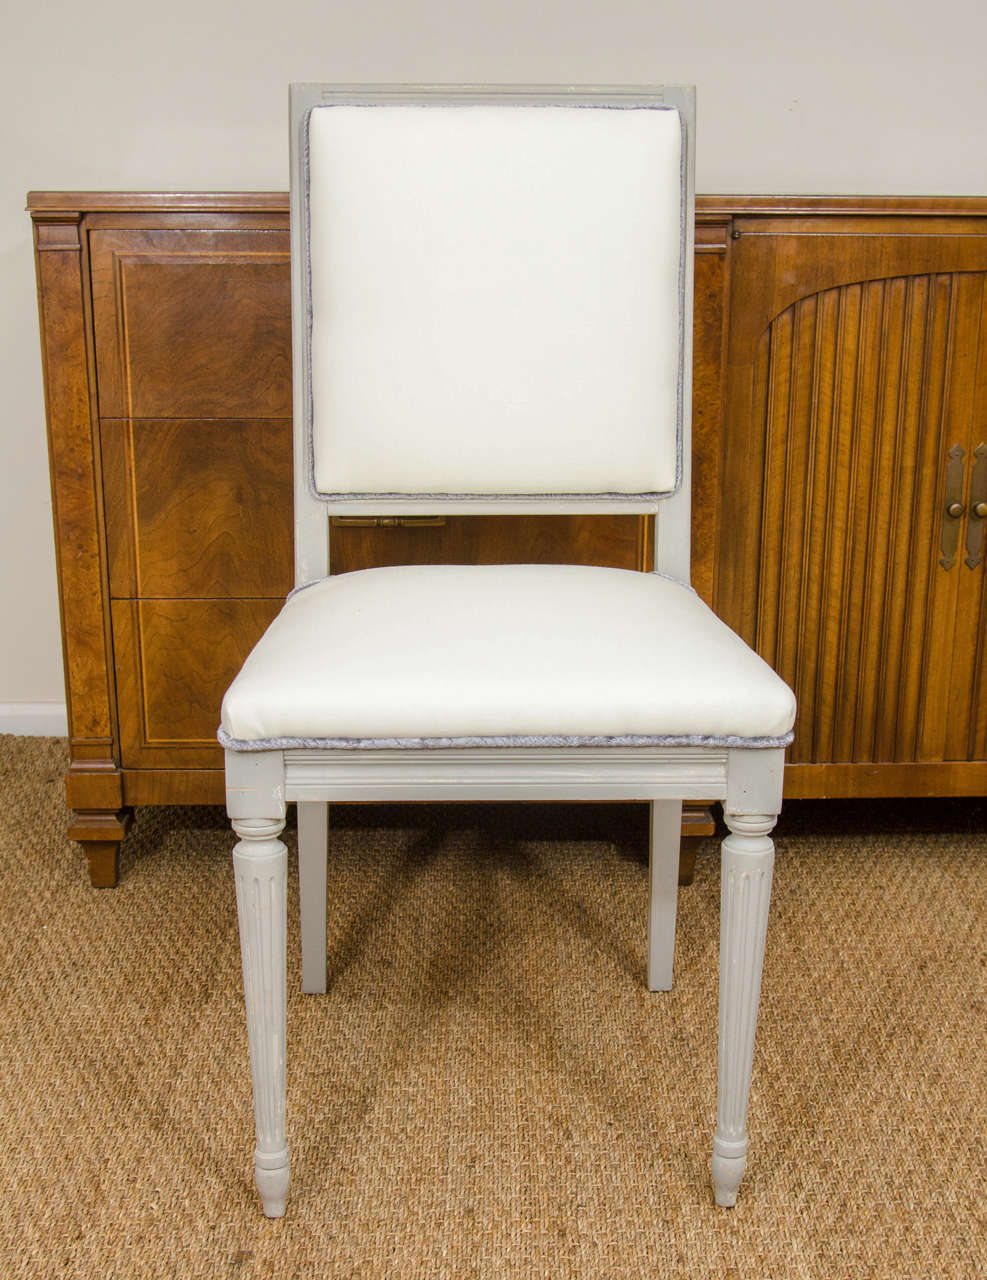 A set of six charming dining chairs, painted in a light gray.